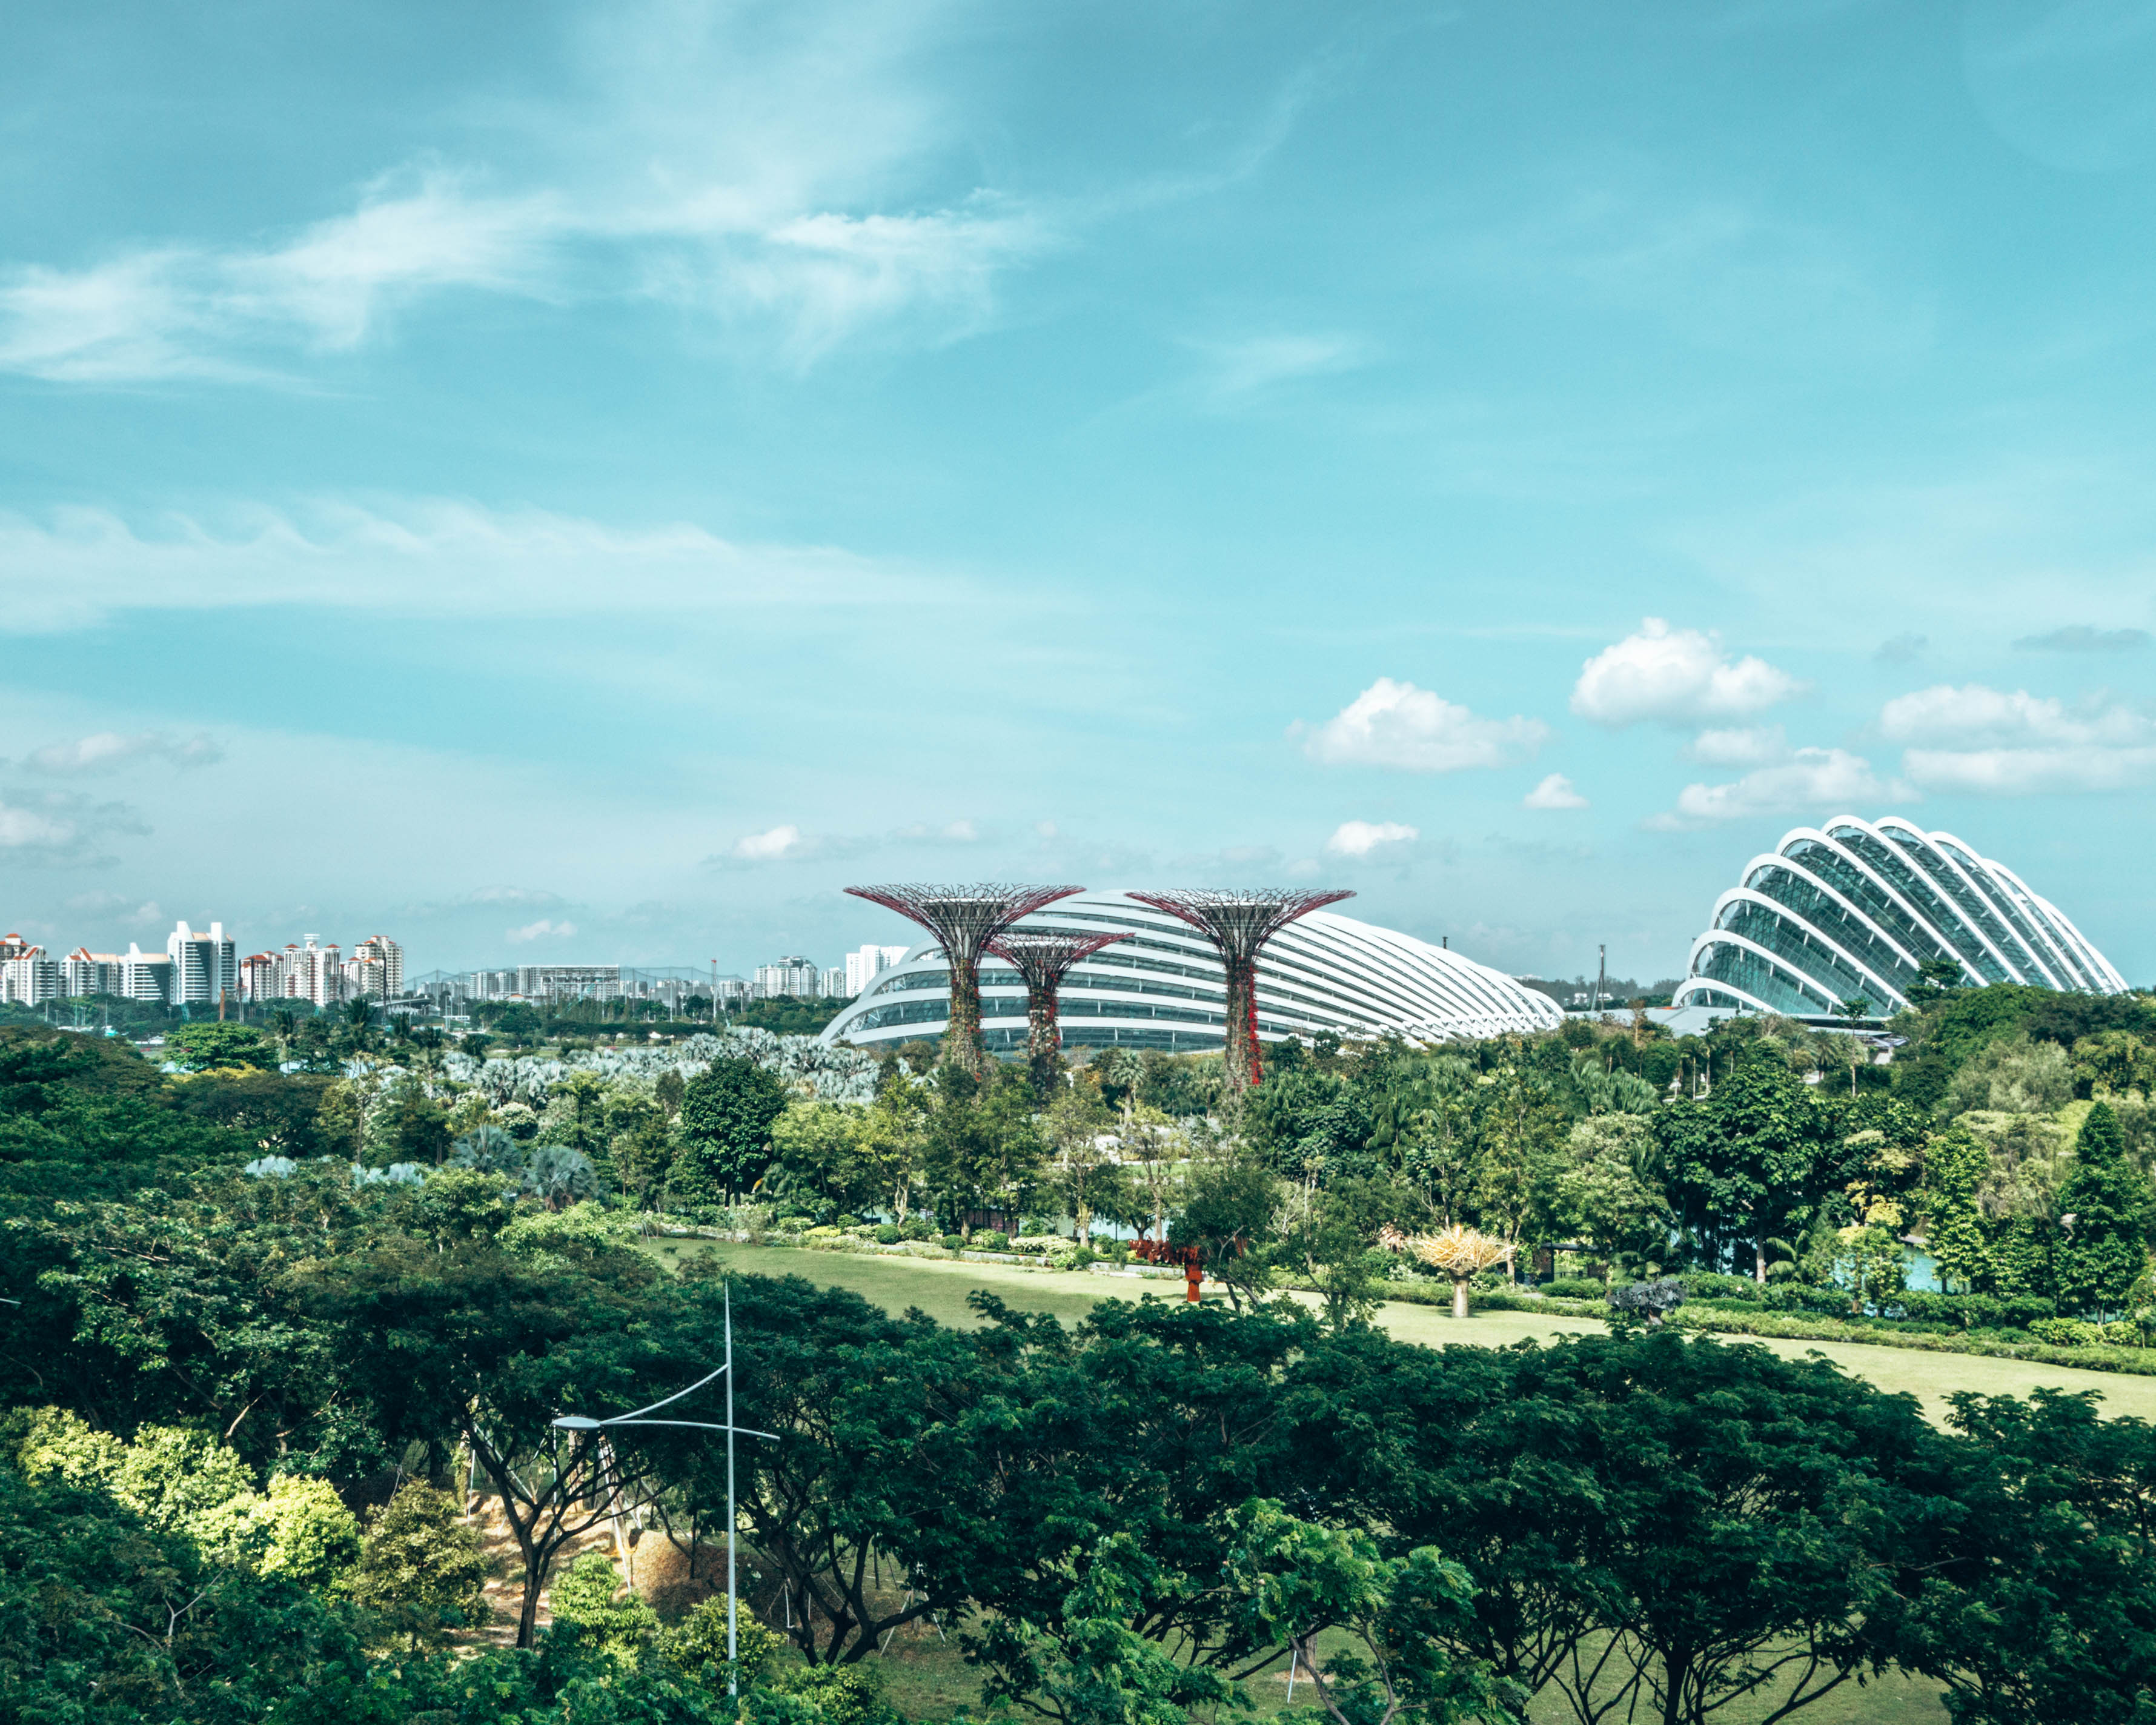 Singapore's Flower Dome and Cloud Forest in the Gardens by the bay - 3-day Singapore itinerary for budget travelers - WeDidItOurWay.com